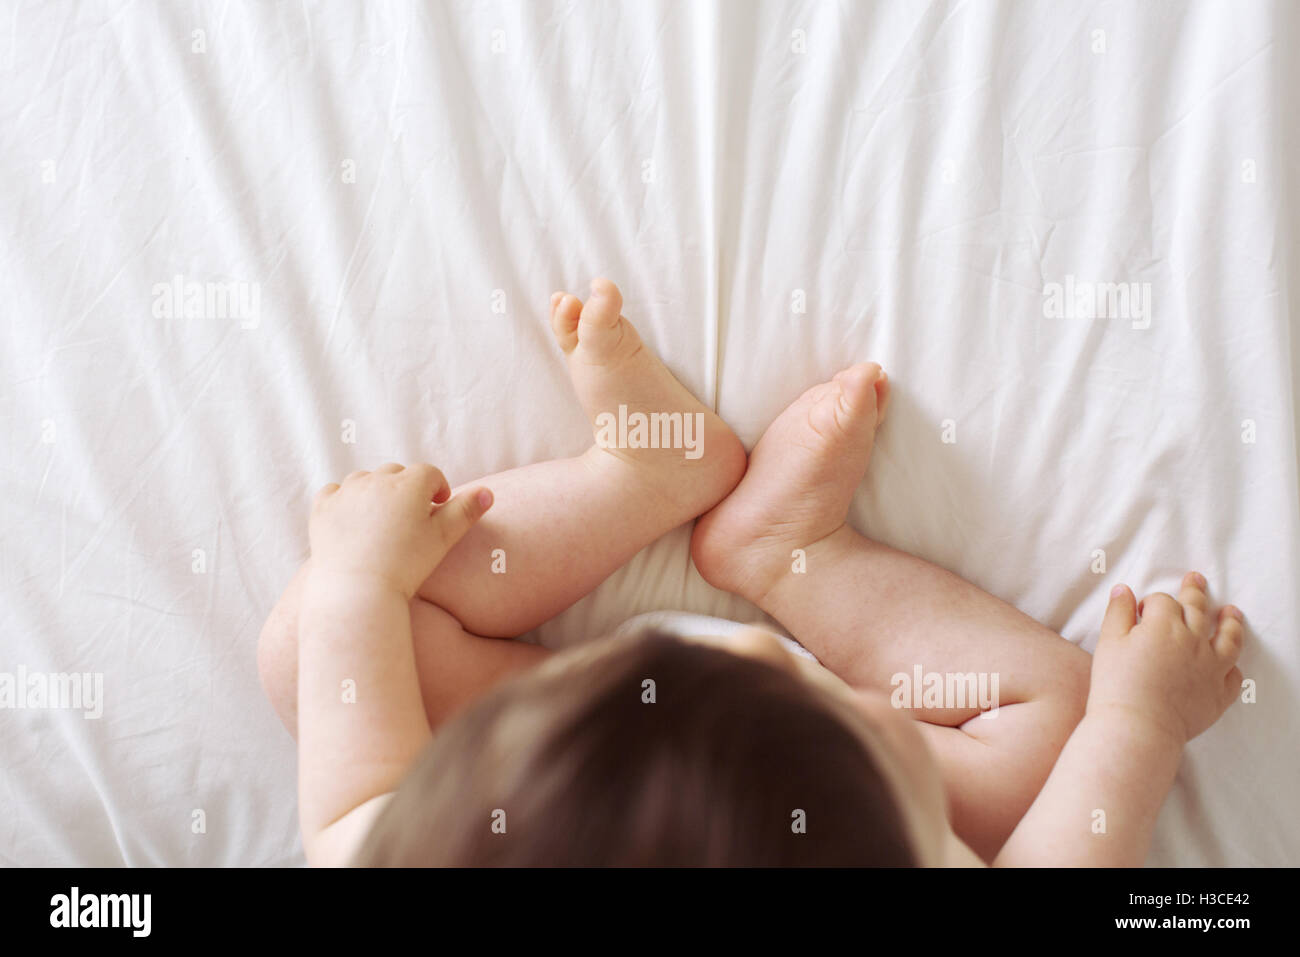 Baby sitting on bed, overhead view Stock Photo